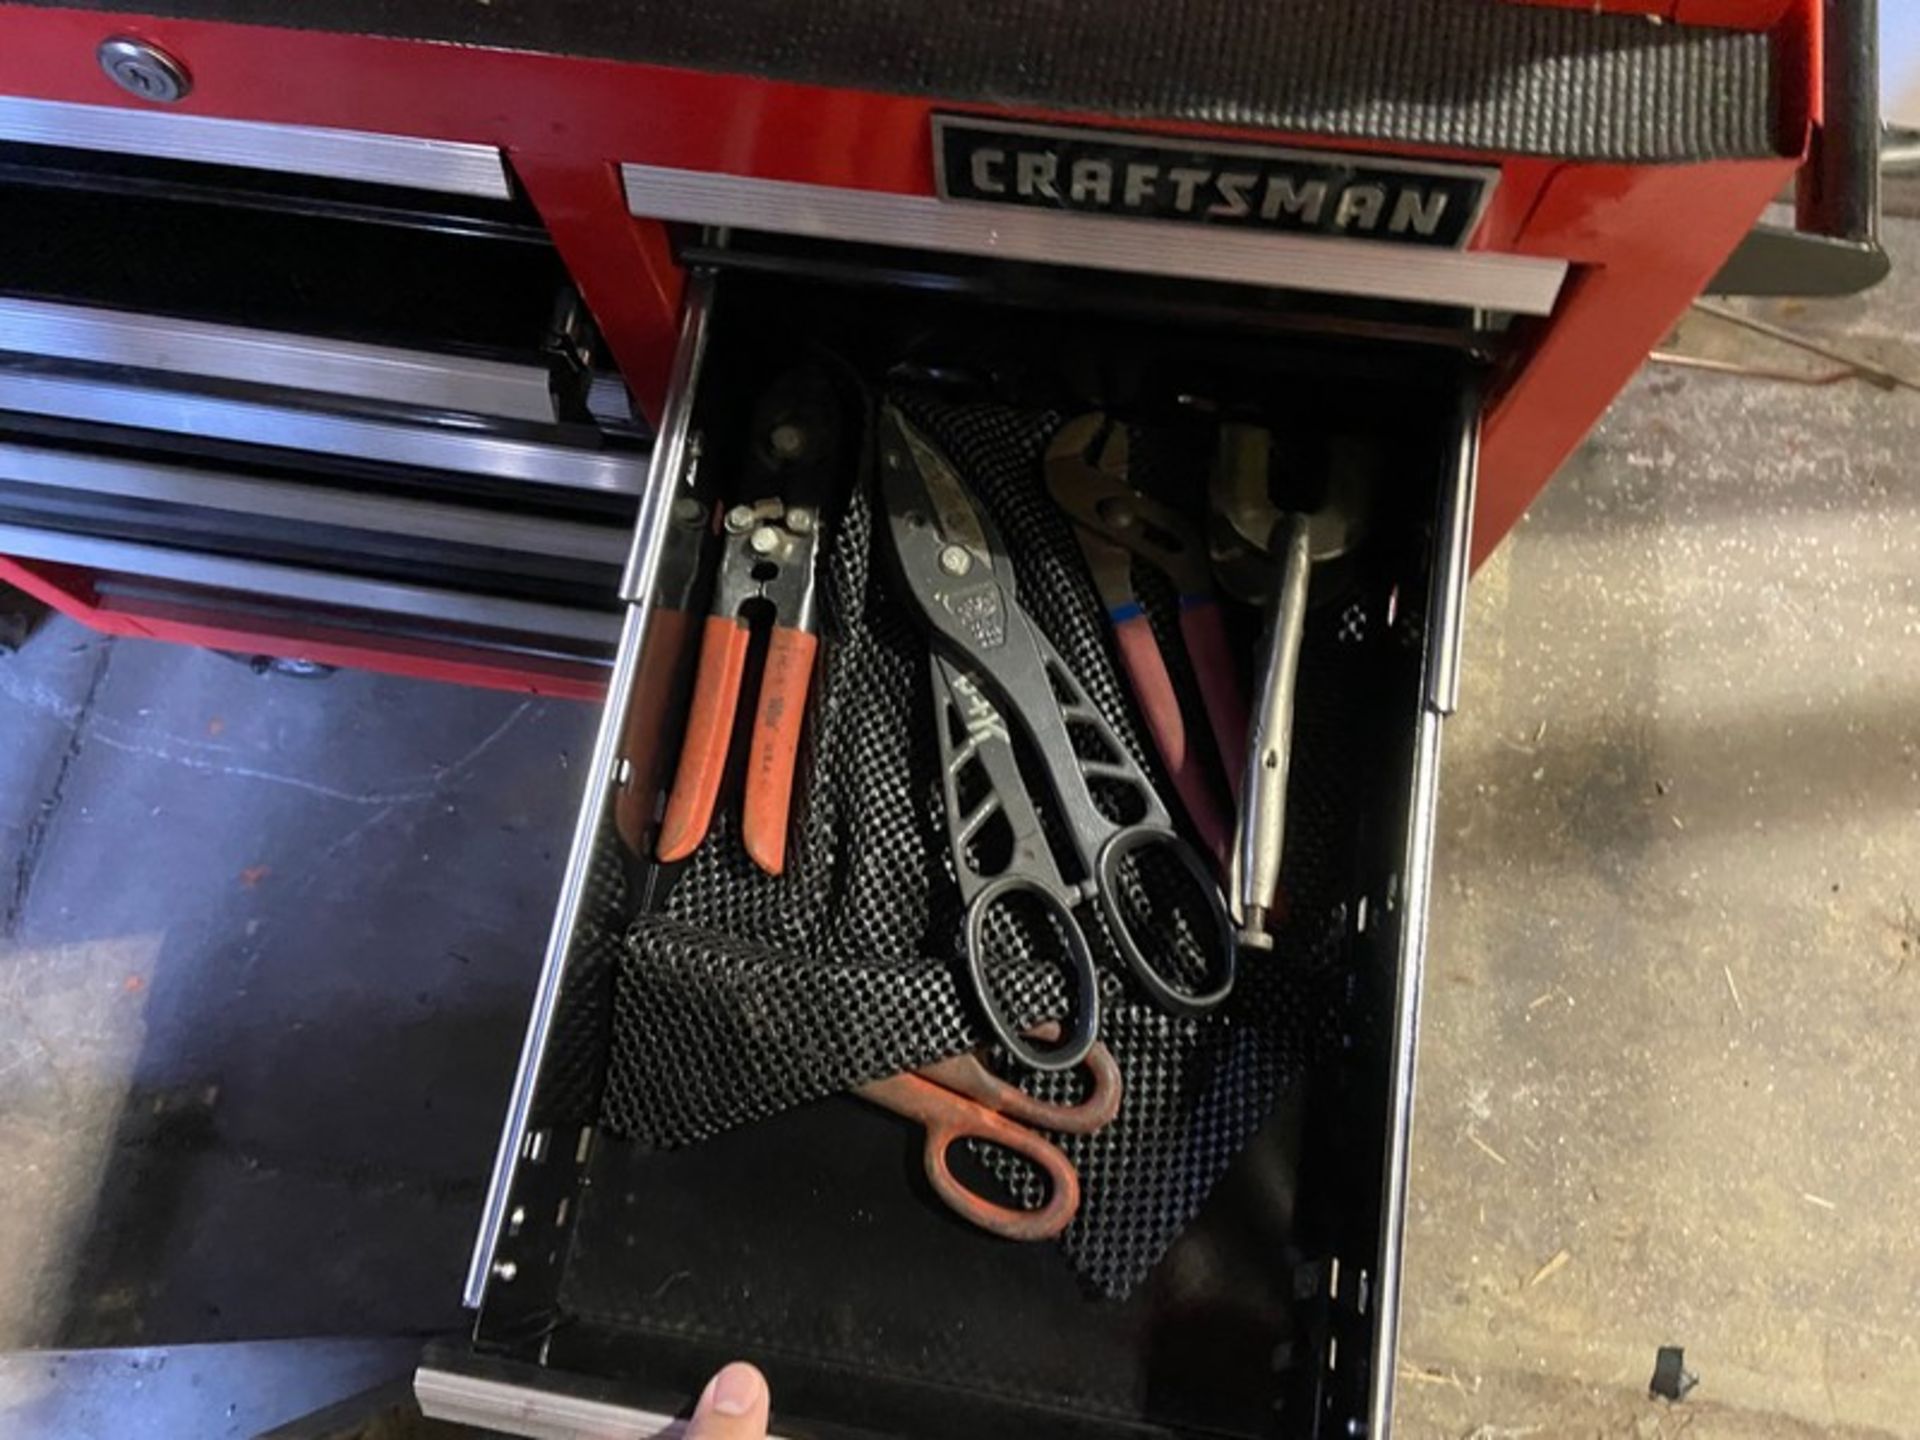 CRAFTSMAN PORTABLE TOOLBOX WITH CONTENTS, INCLUES MONKEY WRENCHES, WRENCHES, SCREW DRIVERS, & OTHER - Image 13 of 15